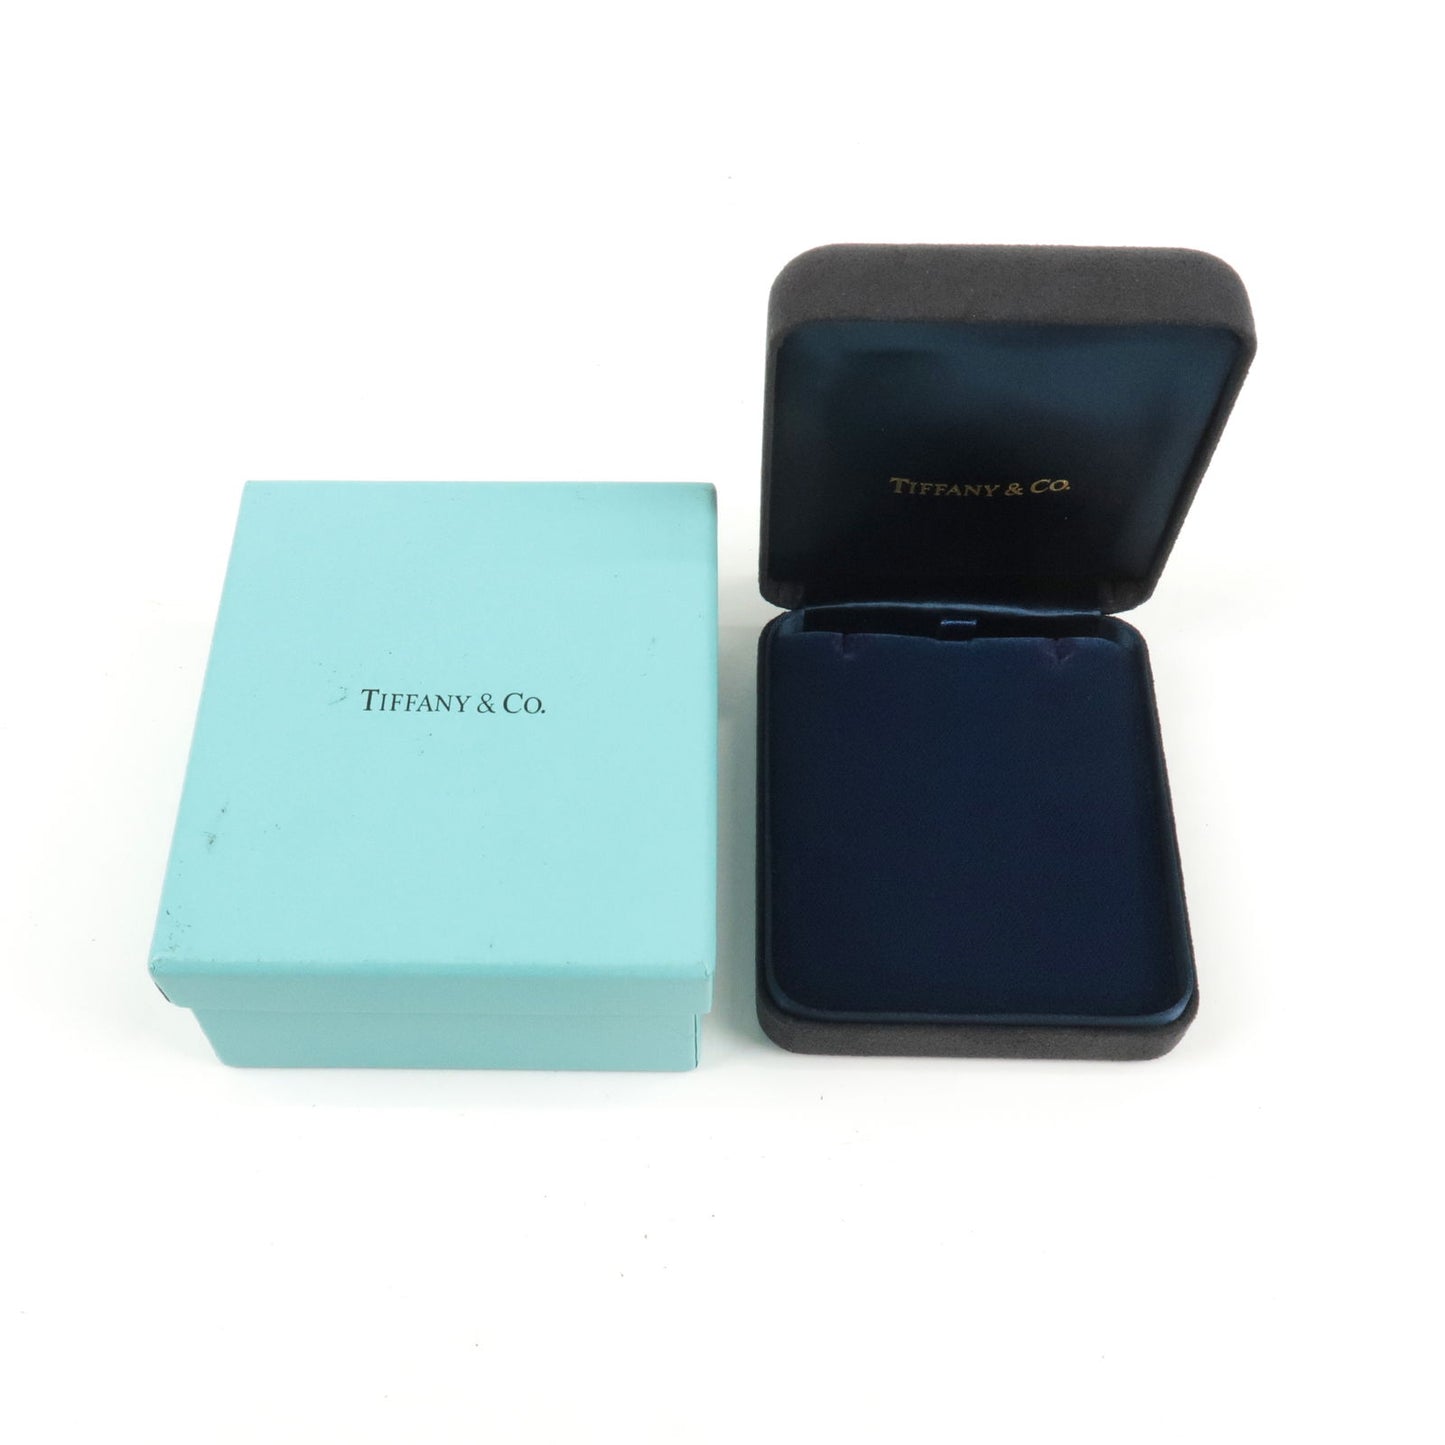 Tiffany&Co. Set of 2 Jewelry Box For Necklace Tiffany Blue